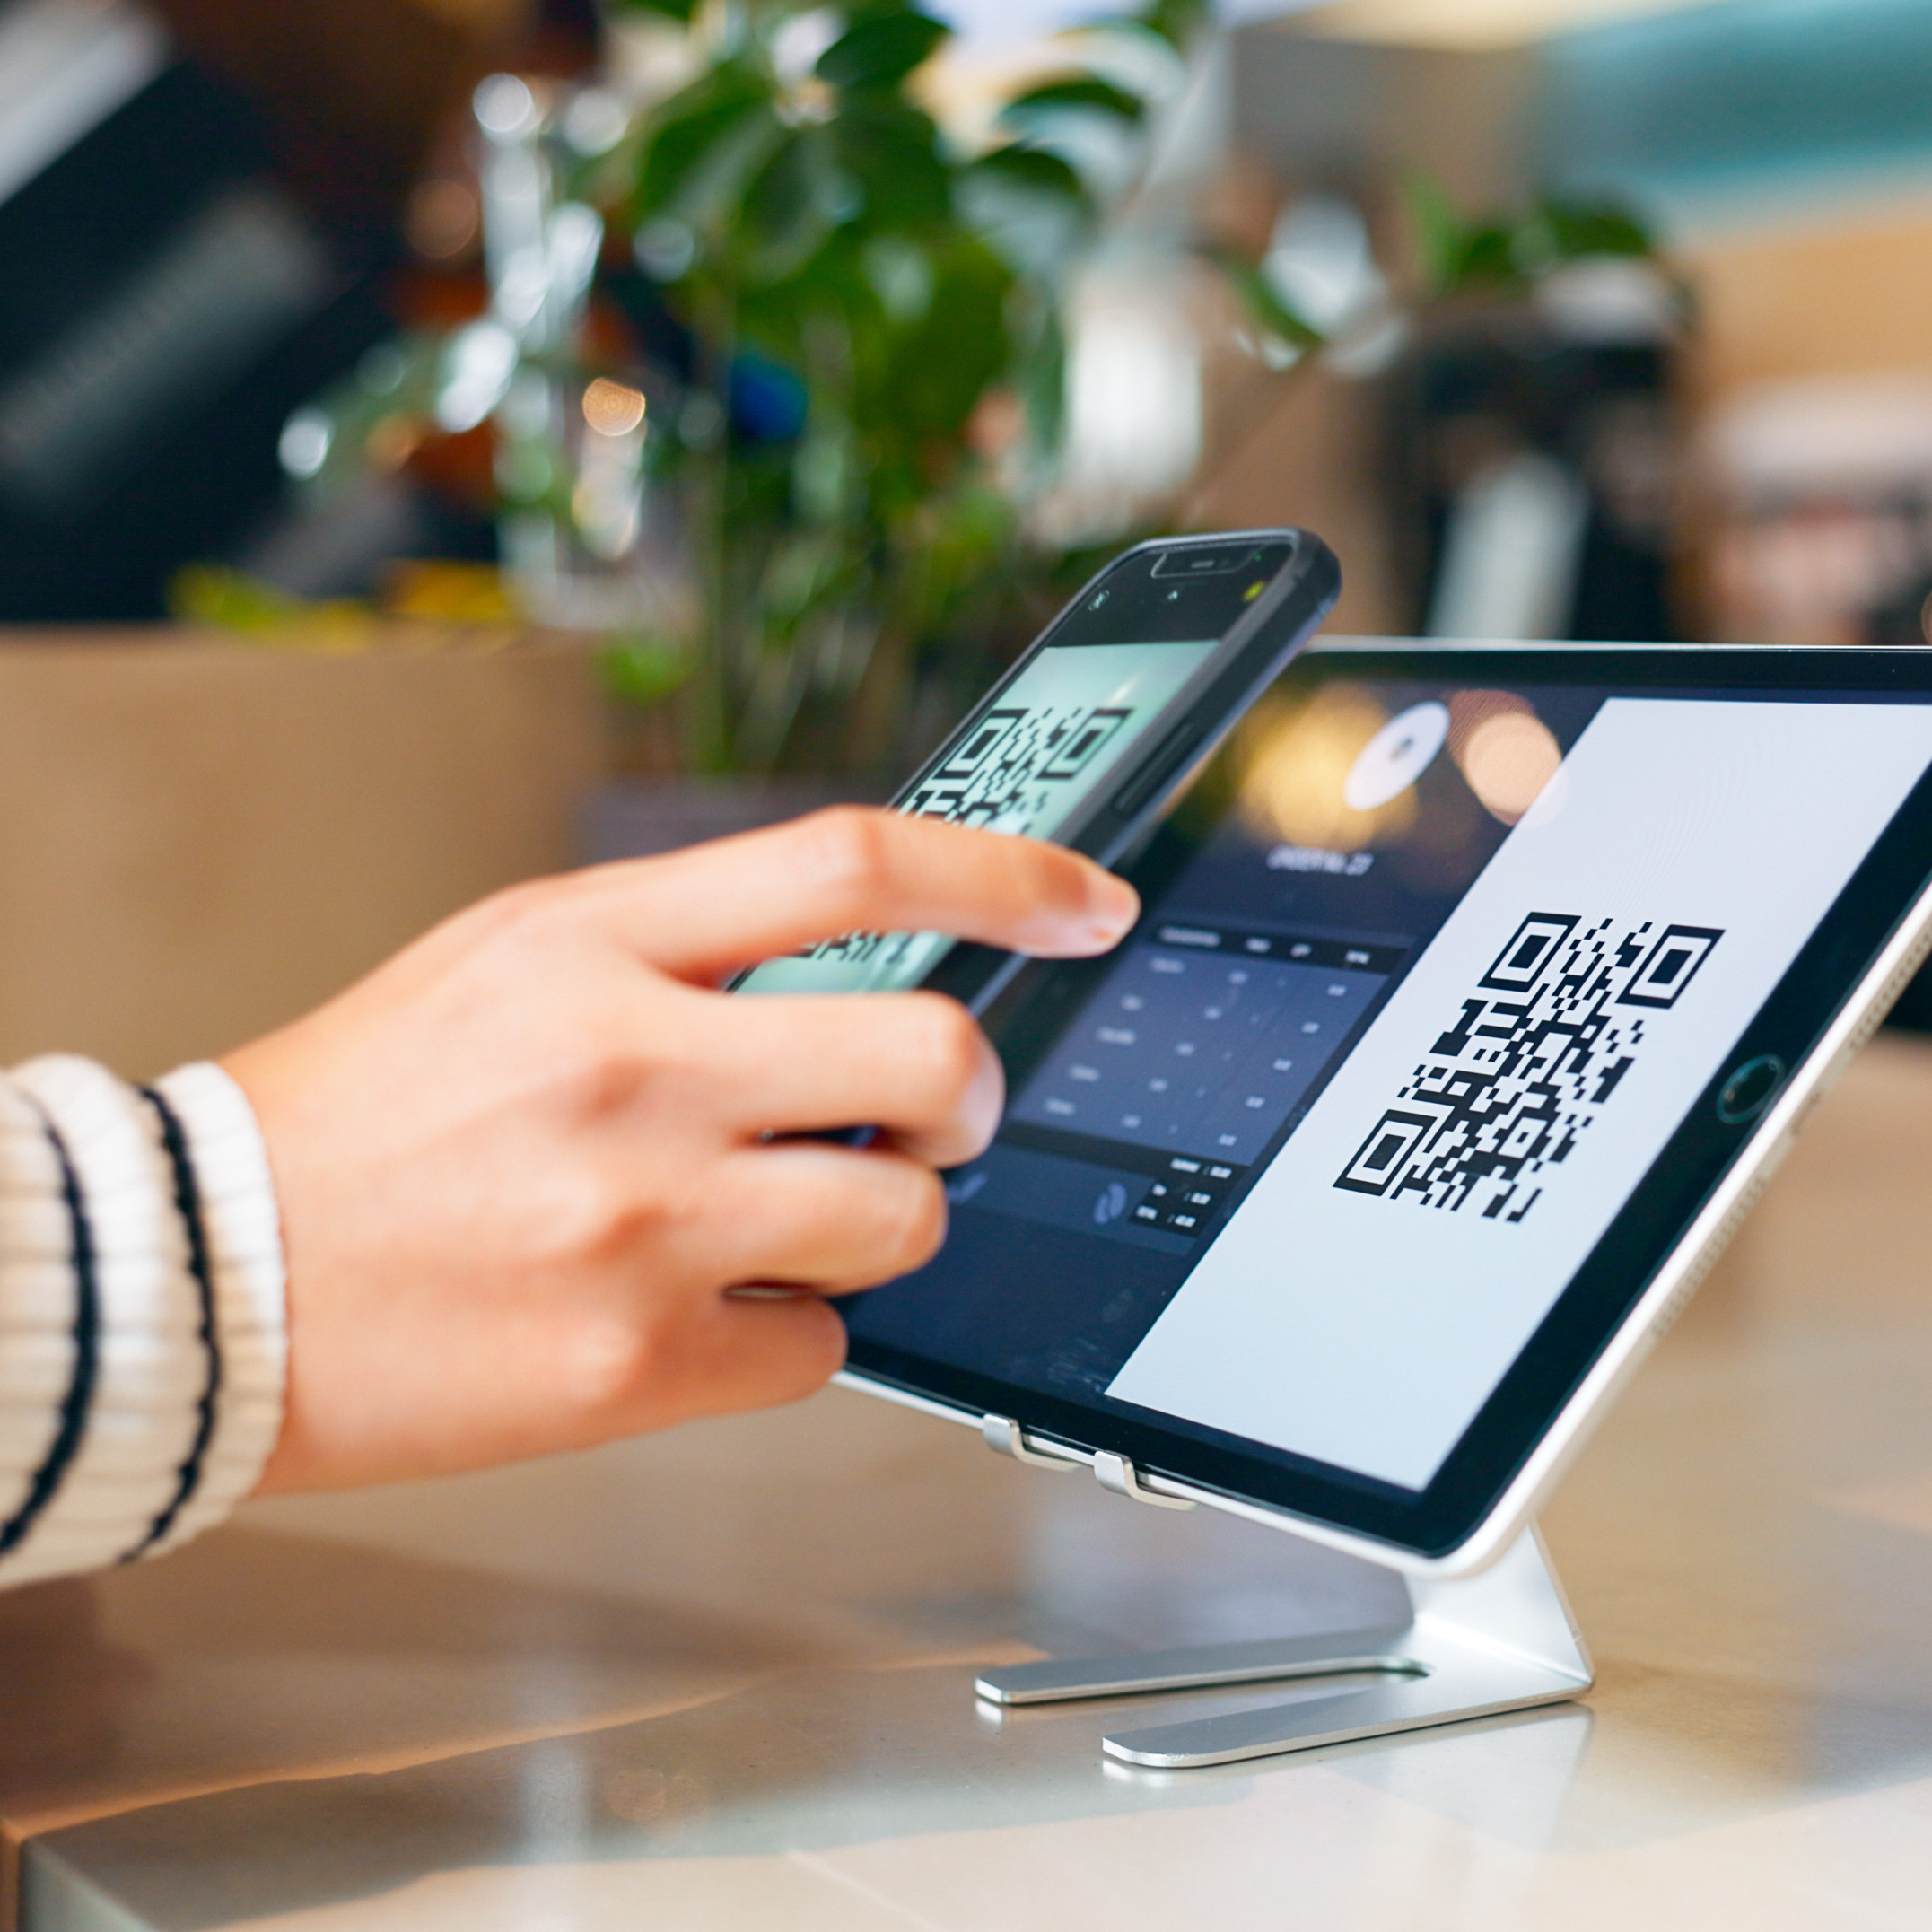 hand holding a phone that is scanning a QR code on an tablet